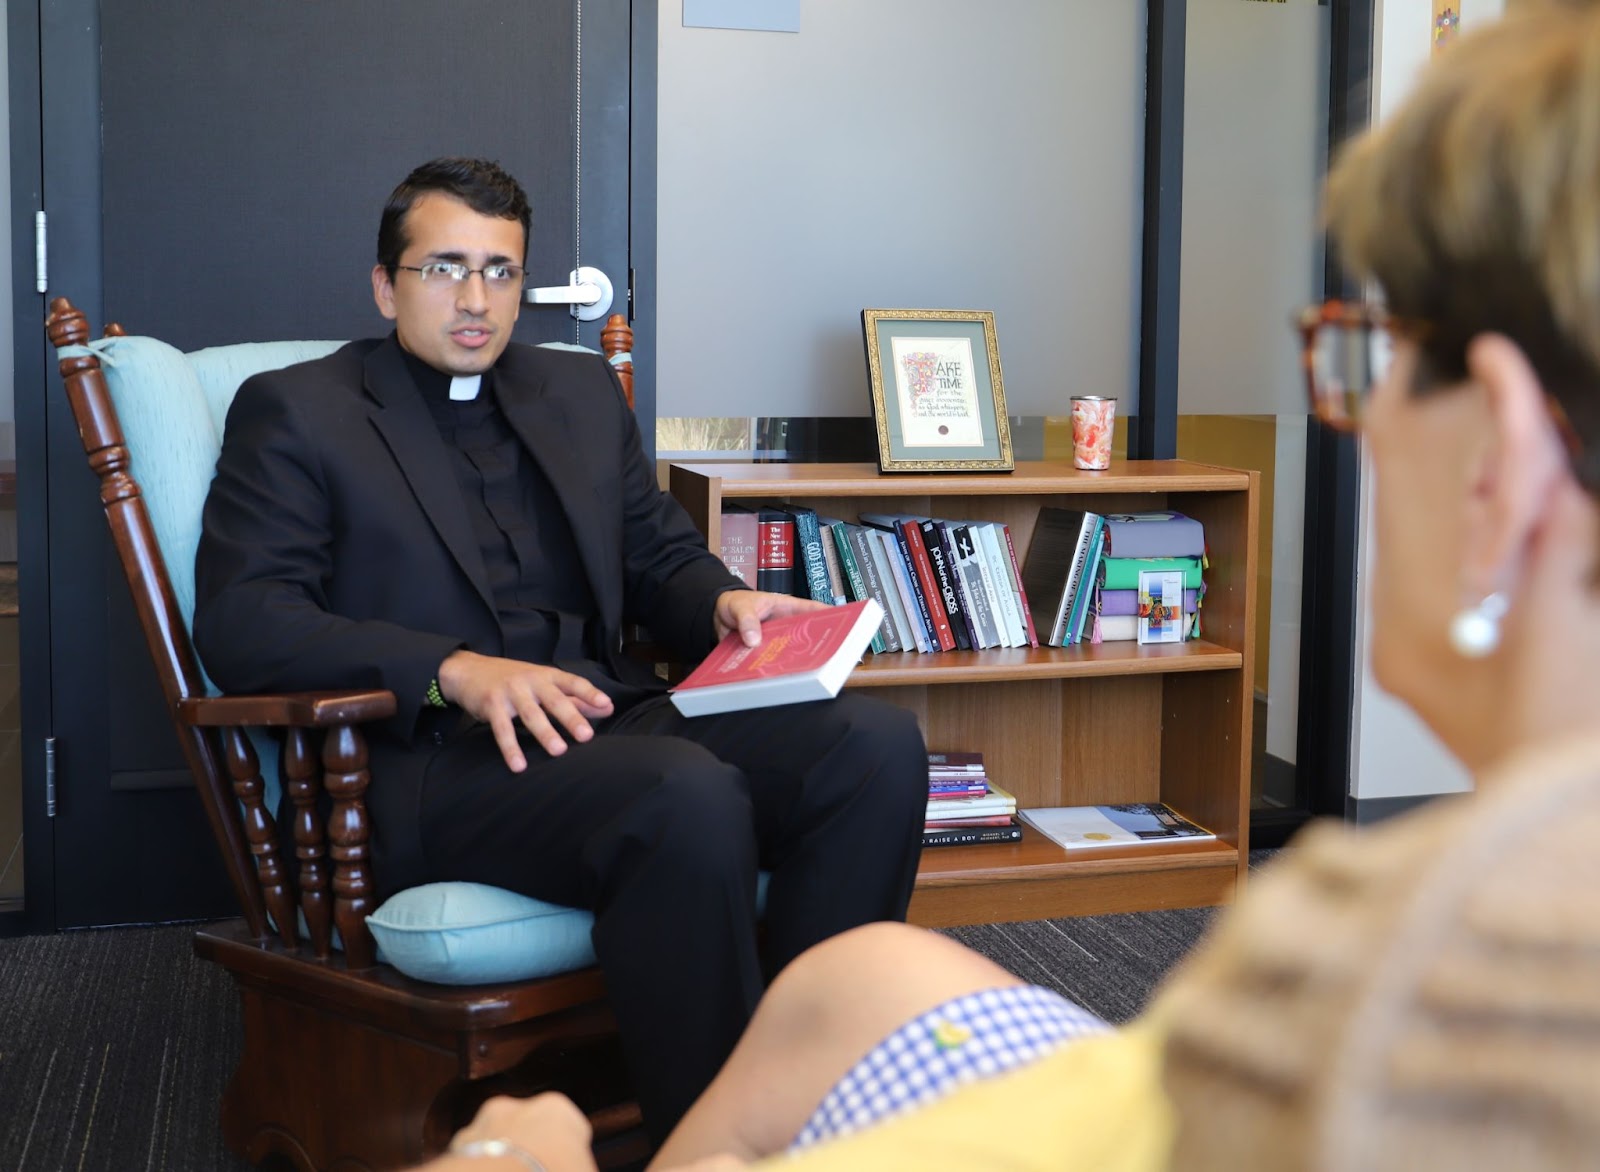 A woman with glasses looks at Christian Verghese who holds a book and wears a priest's collar in a classroom